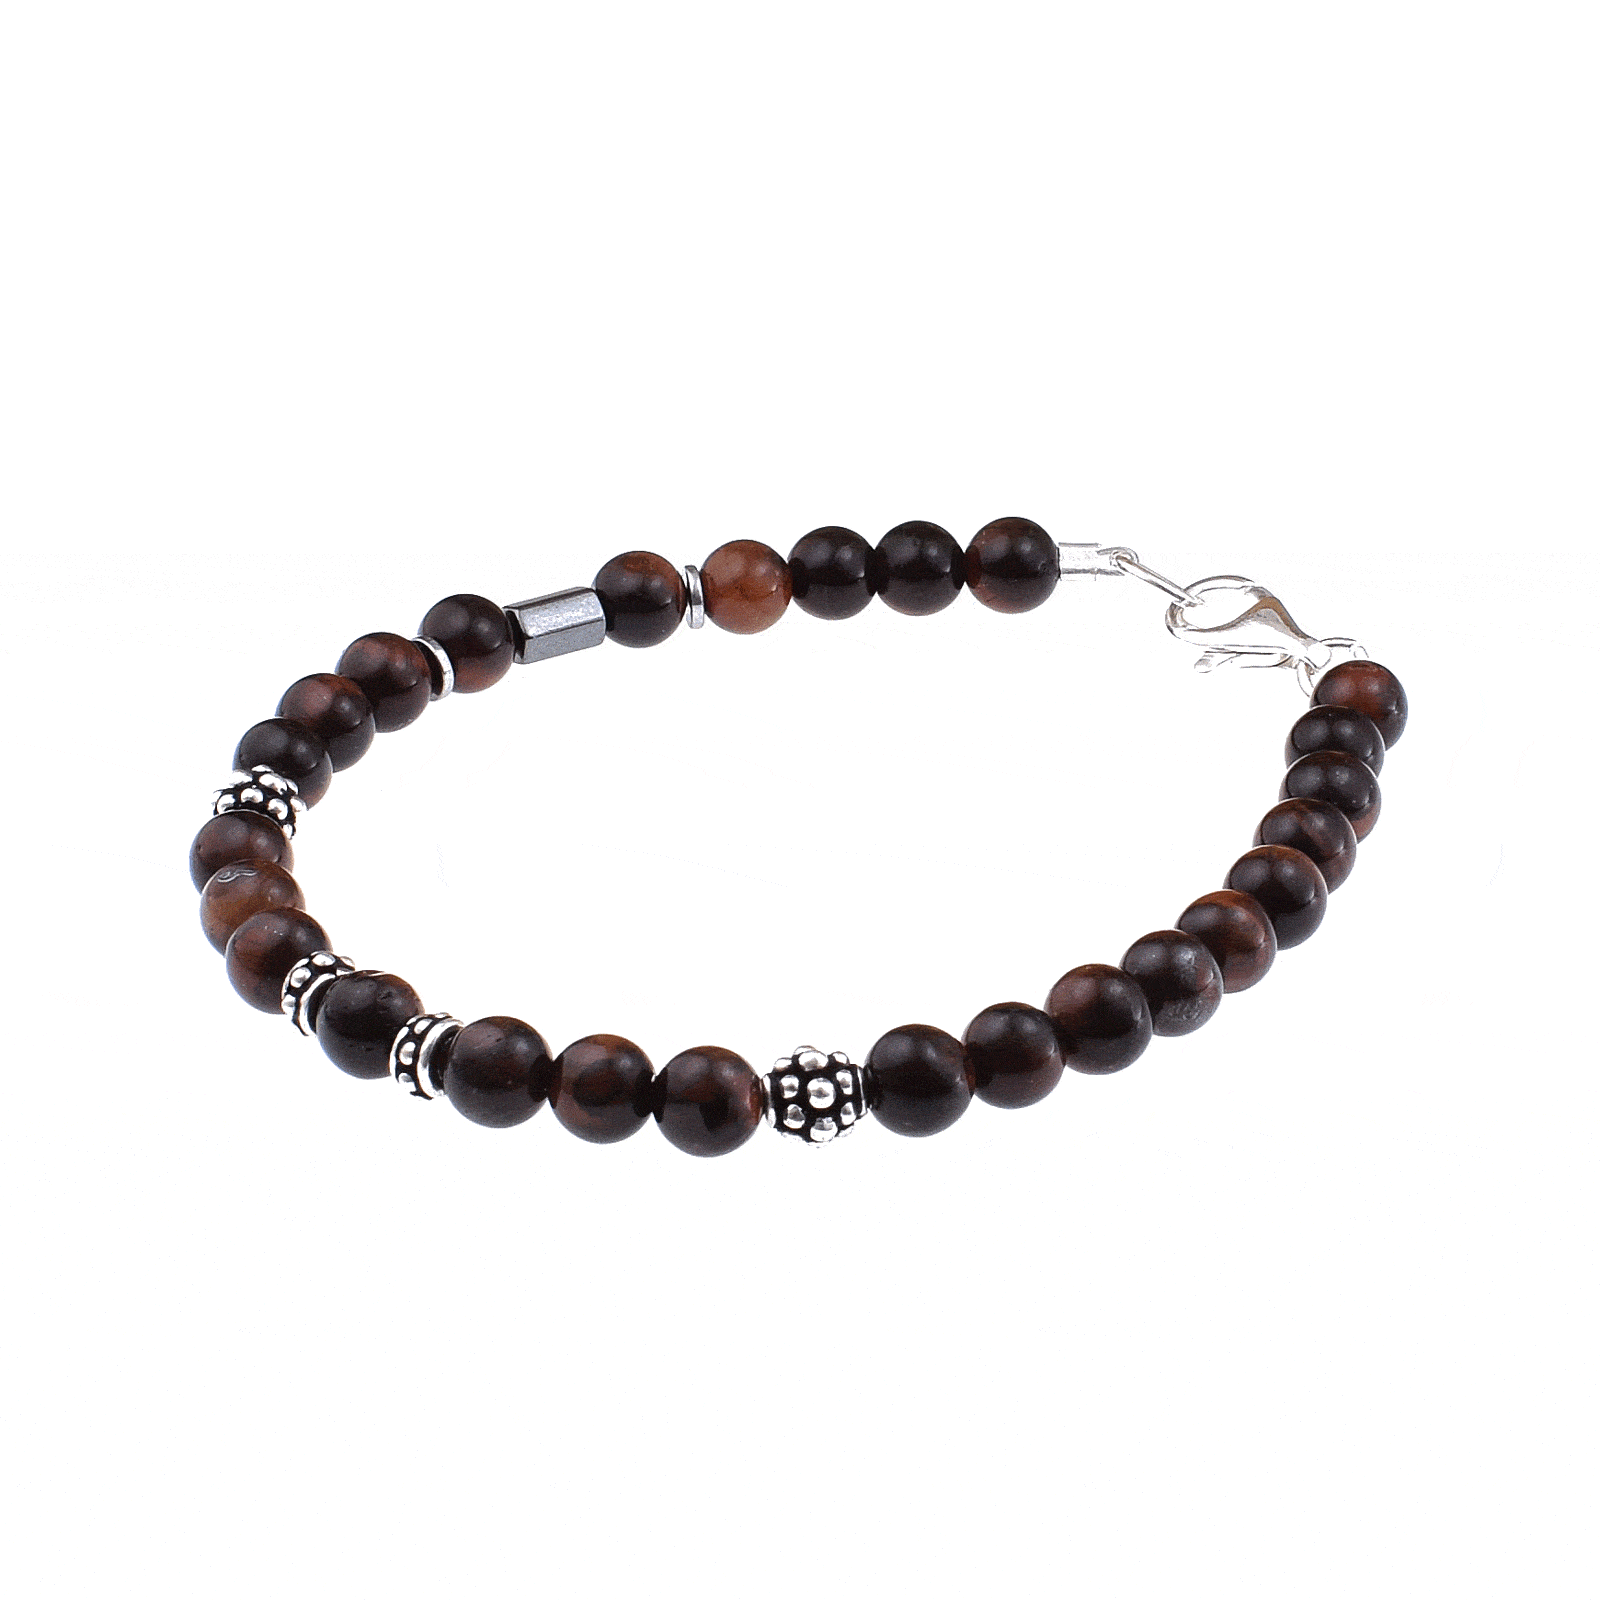 Handmade bracelet with natural red tiger eye and hematite gemstones, decorative elements and clasp made of sterling silver. Buy online shop.